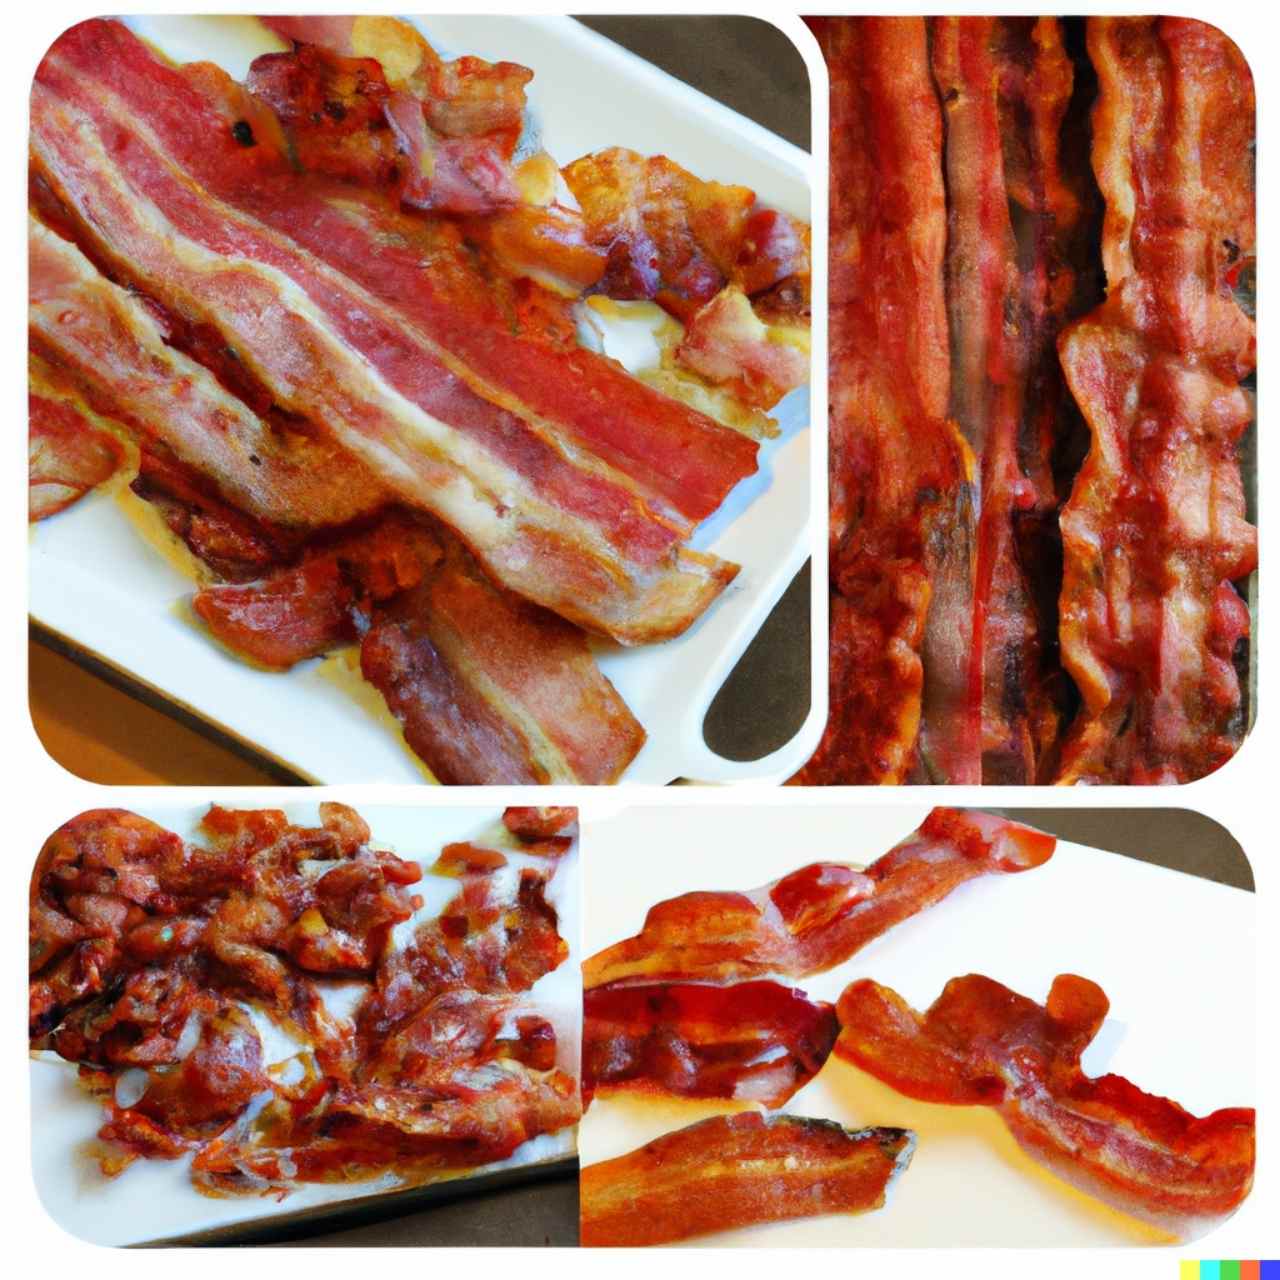 Bacon History and Statistics Like What Is the Most Popular Bacon In America